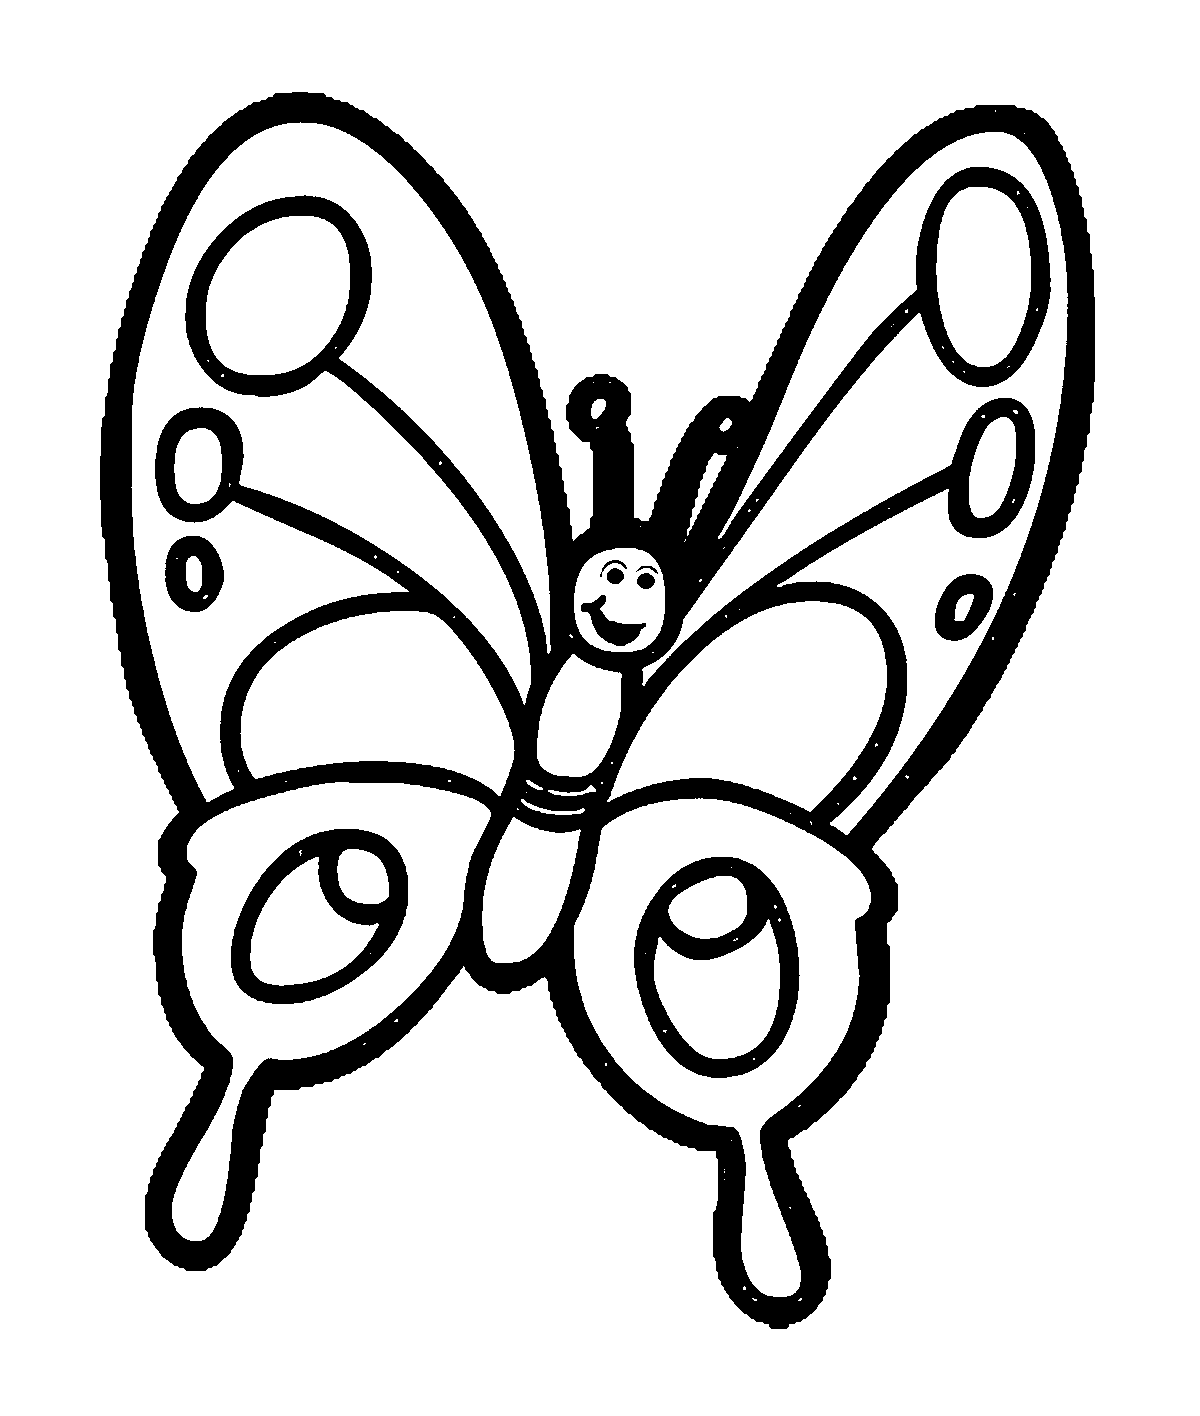 Danger clipart black and white. Butterfly drawing at getdrawings